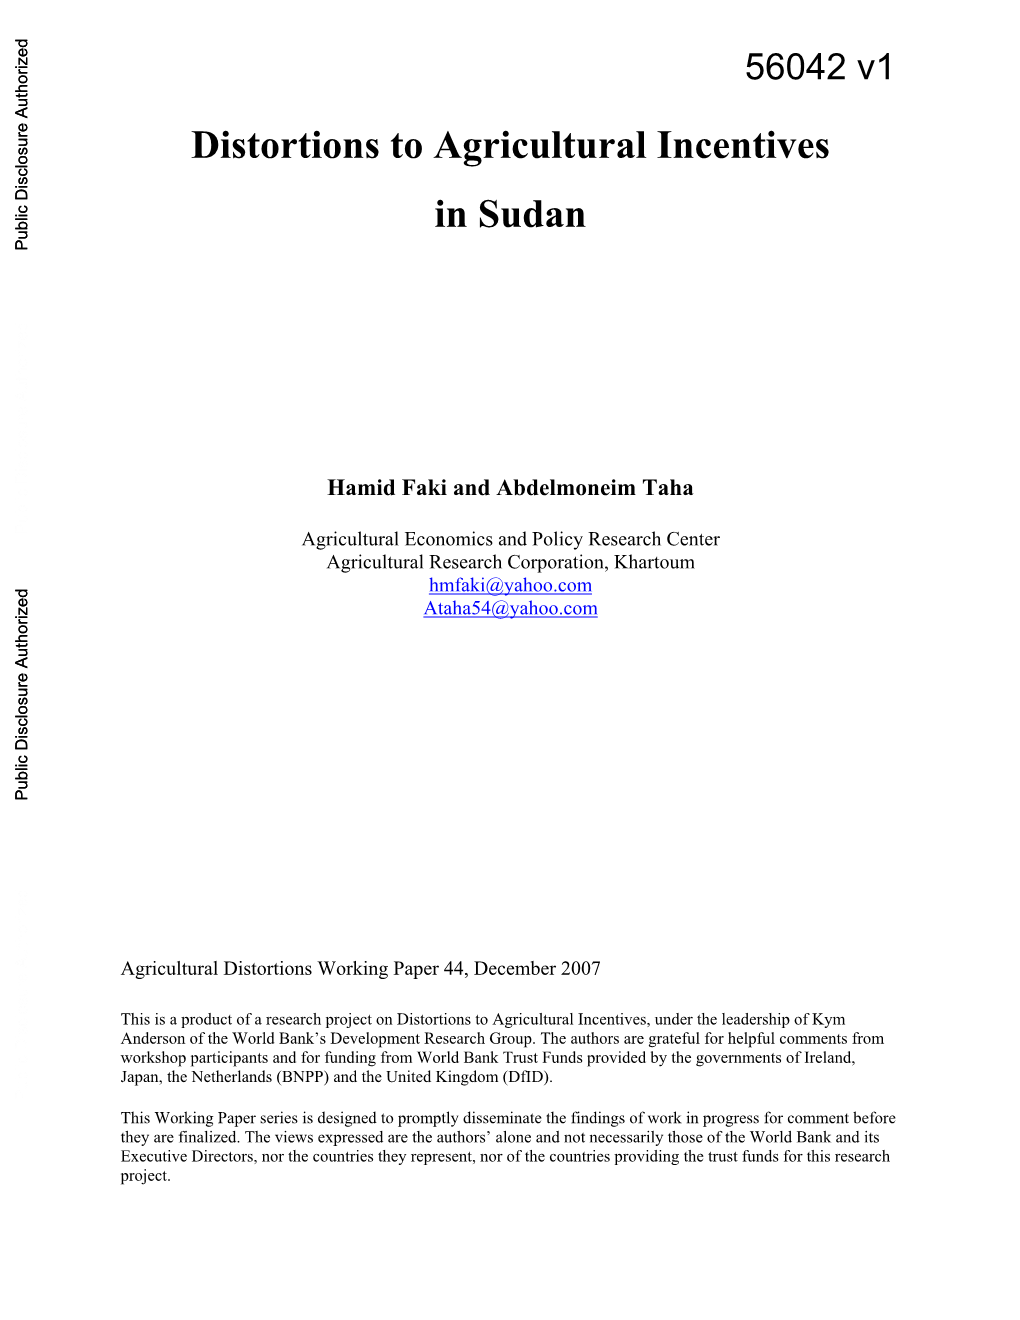 Distortions to Agricultural Incentives in Sudan Public Disclosure Authorized